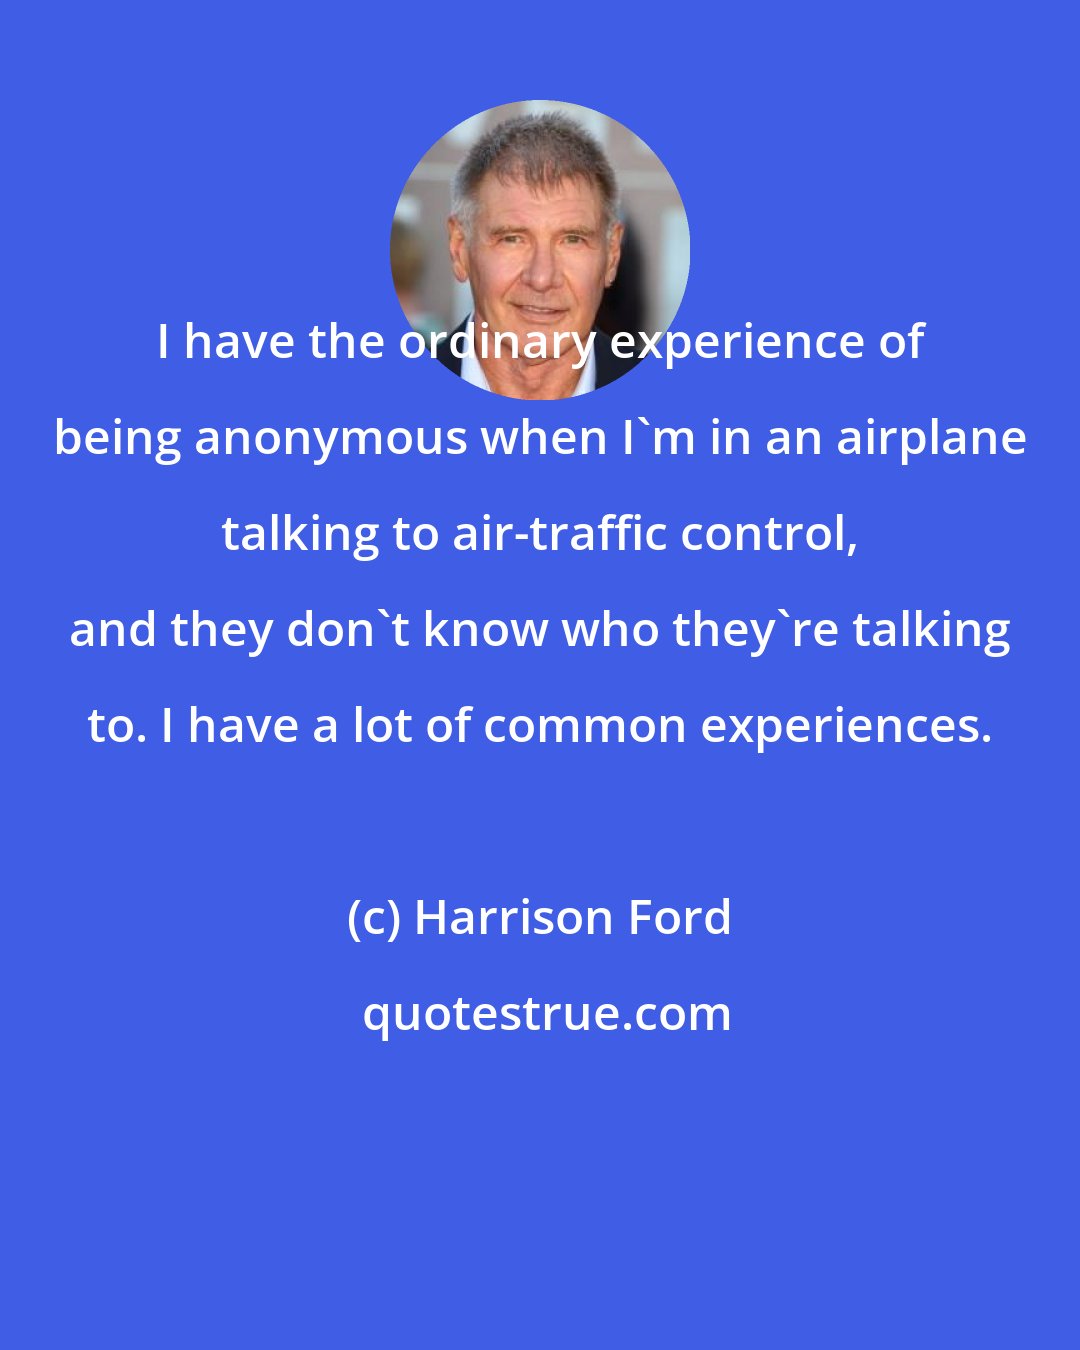 Harrison Ford: I have the ordinary experience of being anonymous when I'm in an airplane talking to air-traffic control, and they don't know who they're talking to. I have a lot of common experiences.